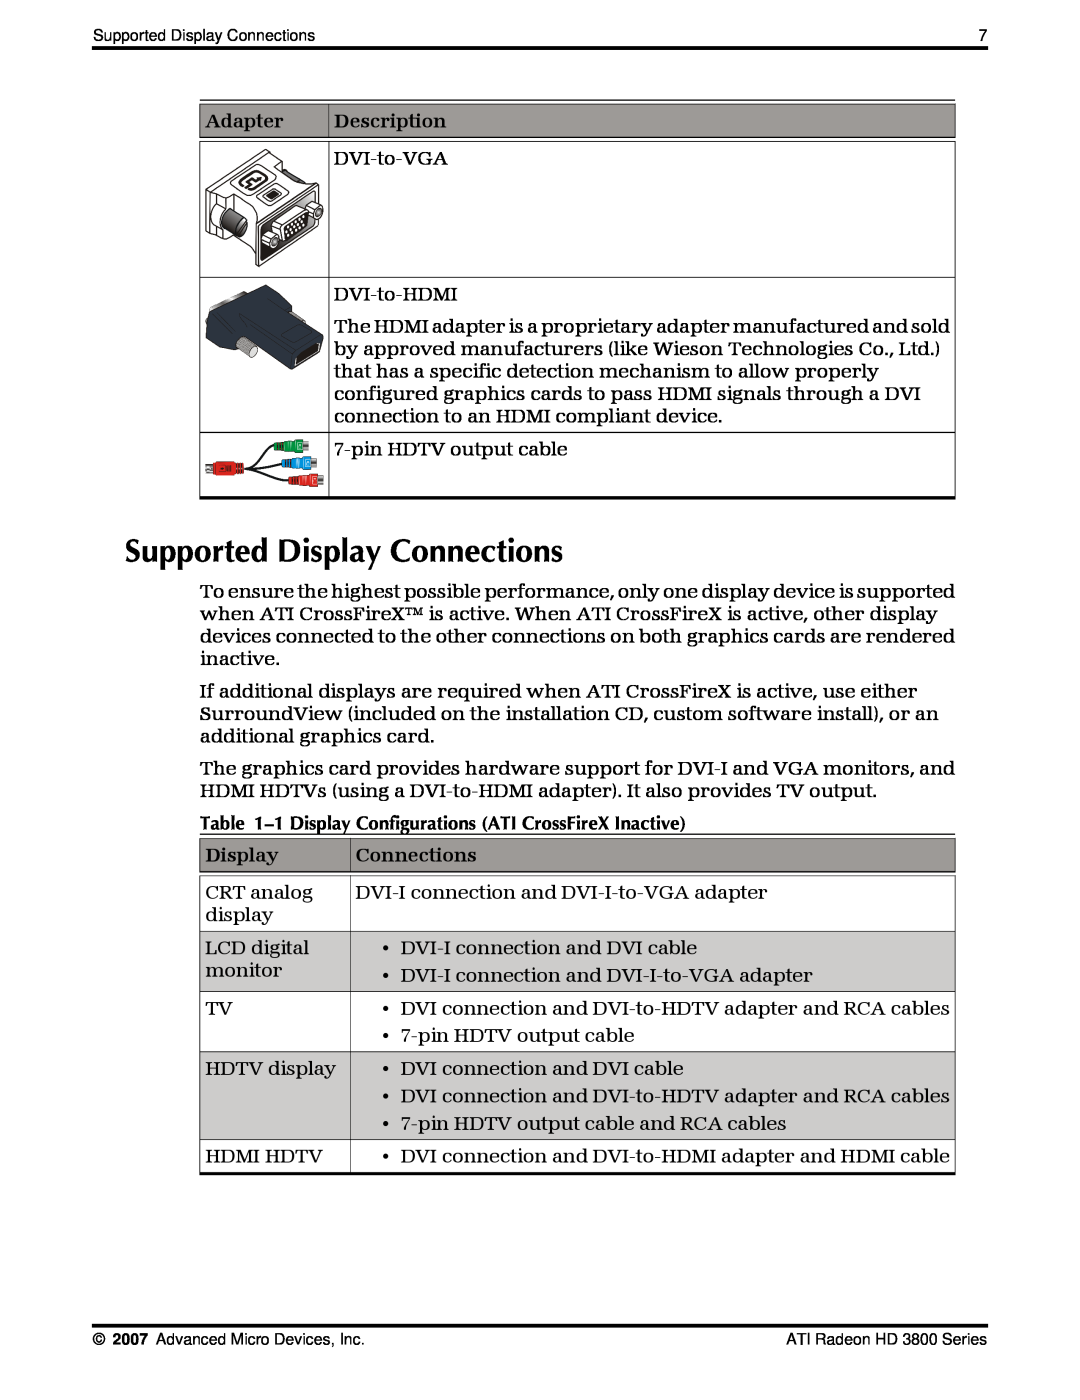 AMD HD 3800 manual Supported Display Connections, Adapter, Description, 1 Display Configurations ATI CrossFireX Inactive 